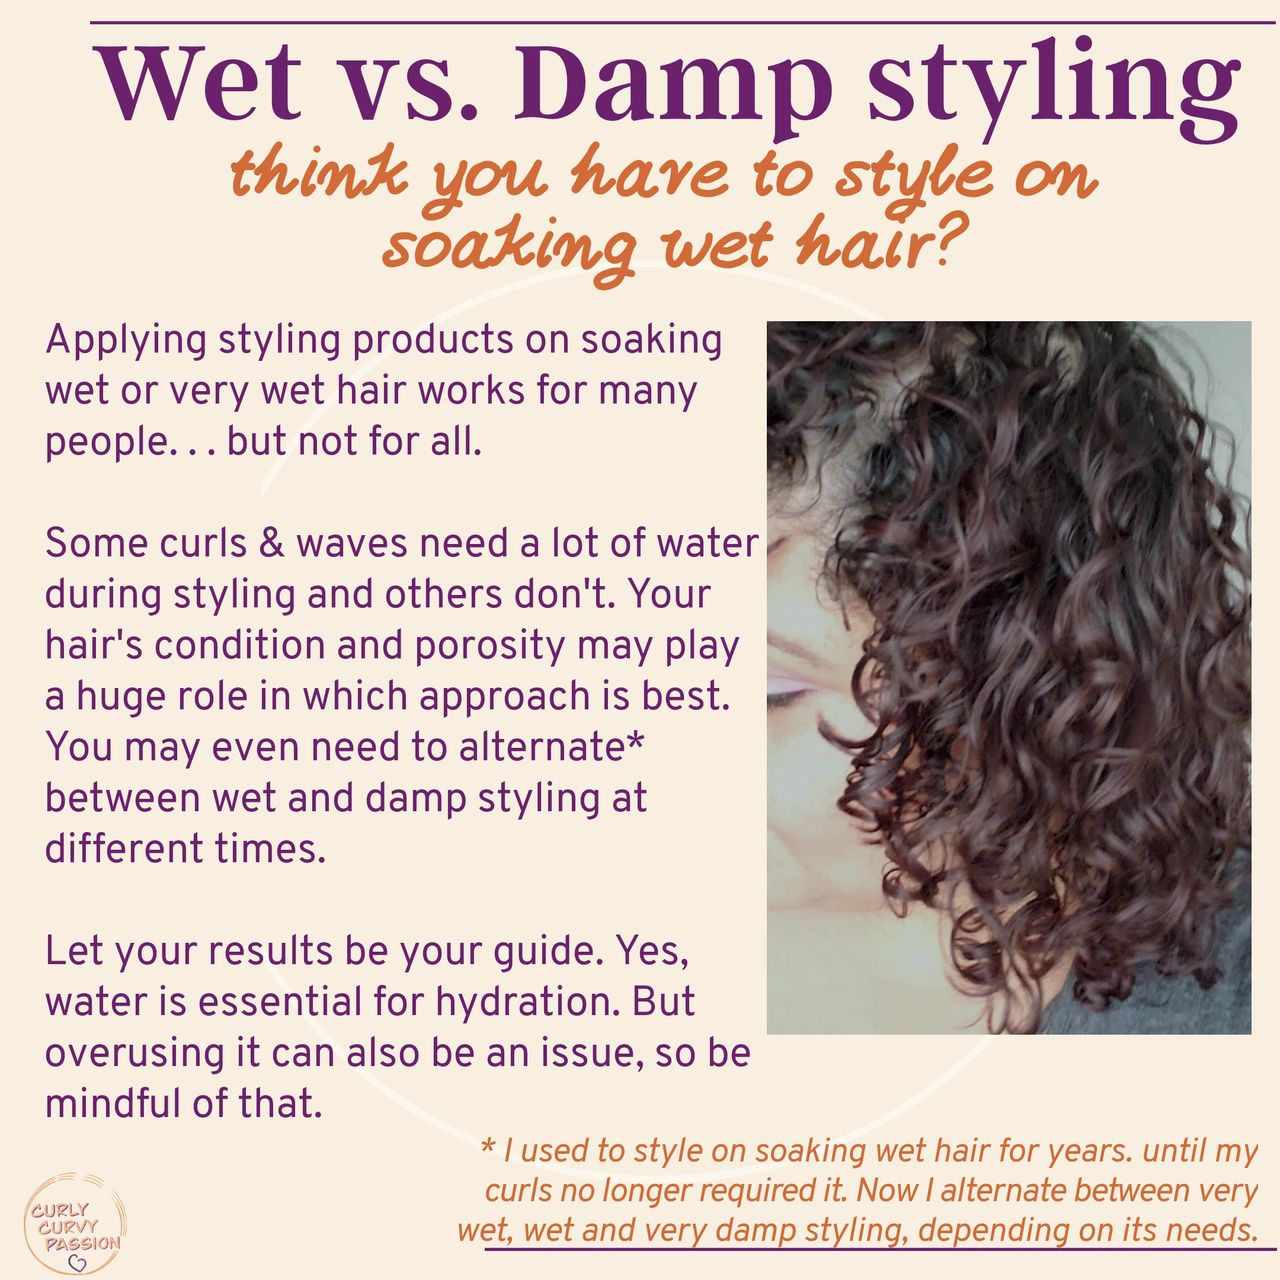 Caring For Your Curls Shouldn't be Stressing You Out!